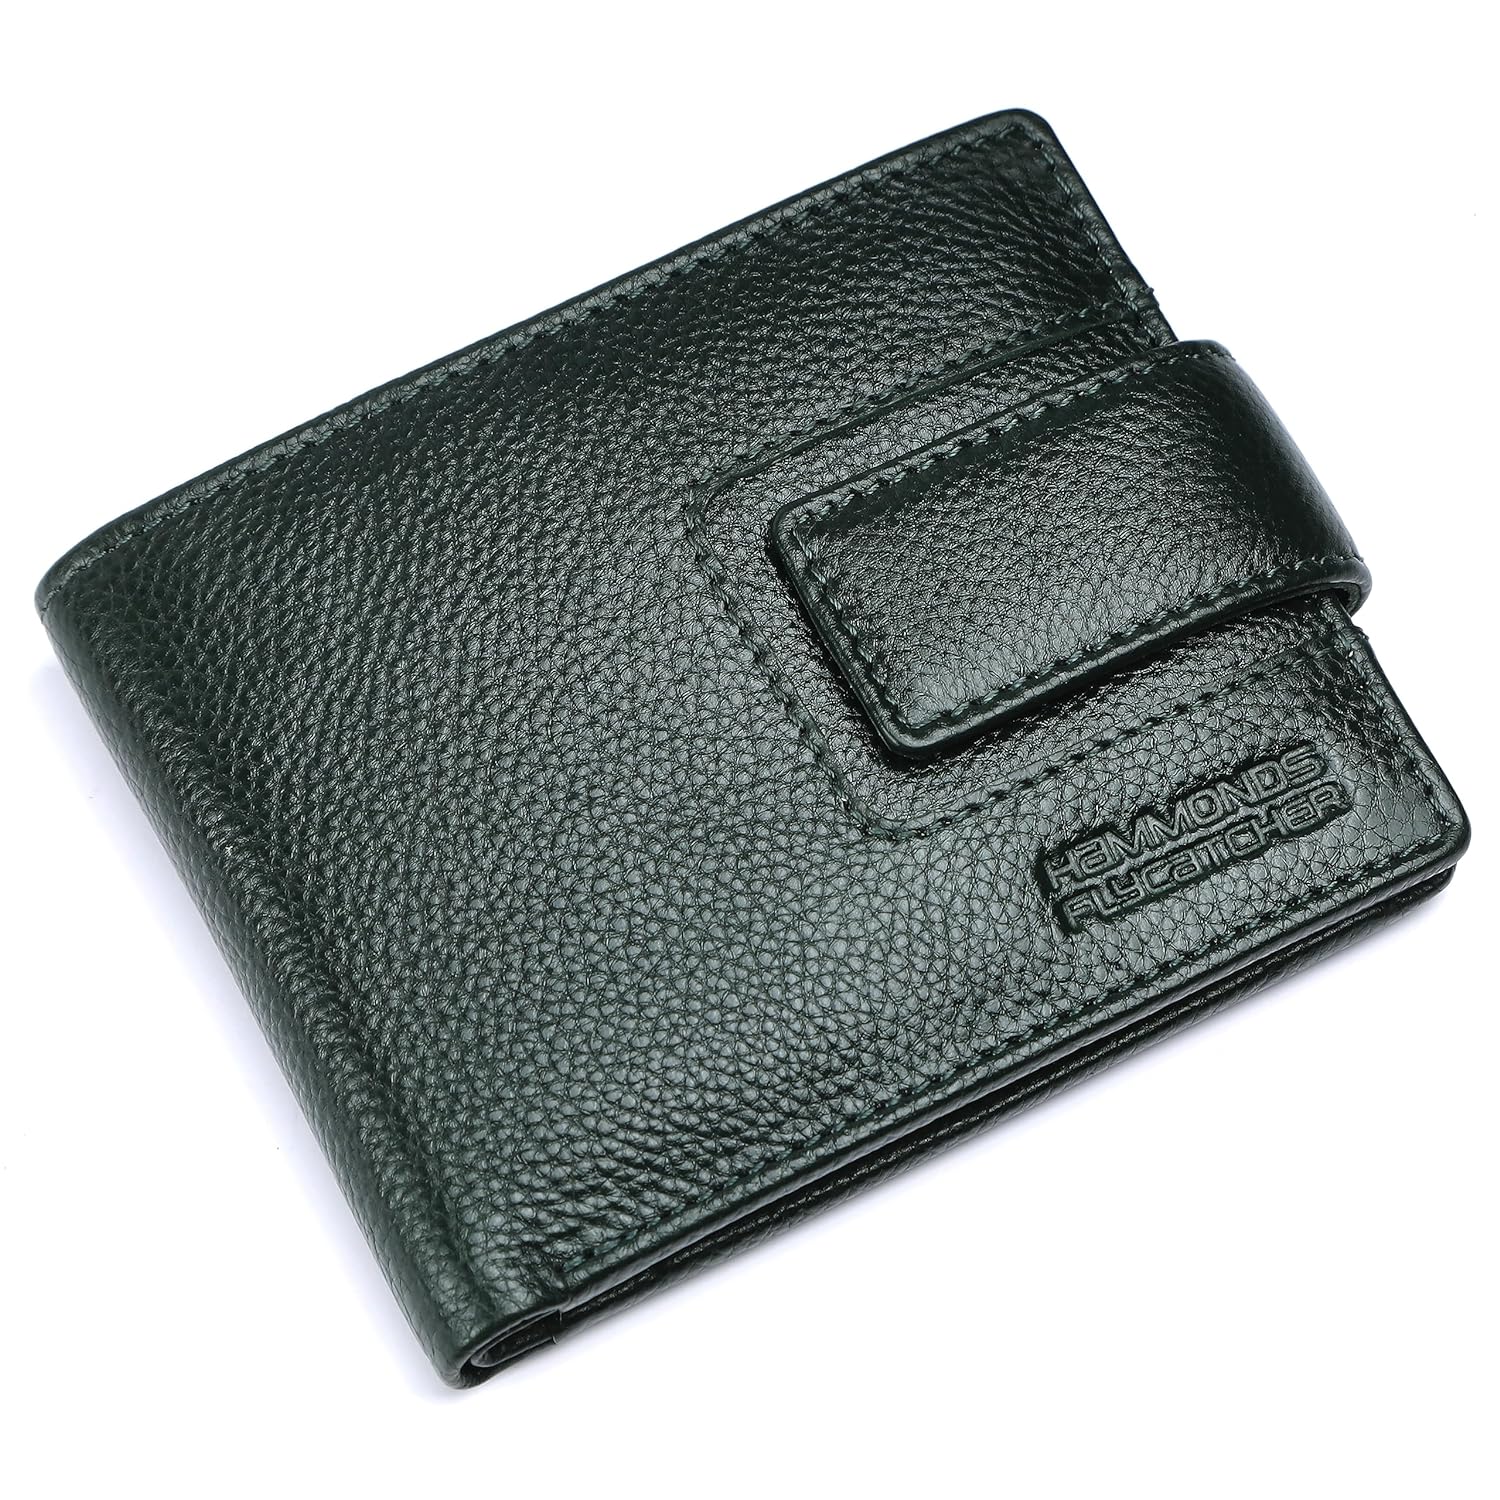 RFID Protected Bi-Fold Leather Wallet for Men - 6 Card Slots - Snap Button Closure - Gift for Men